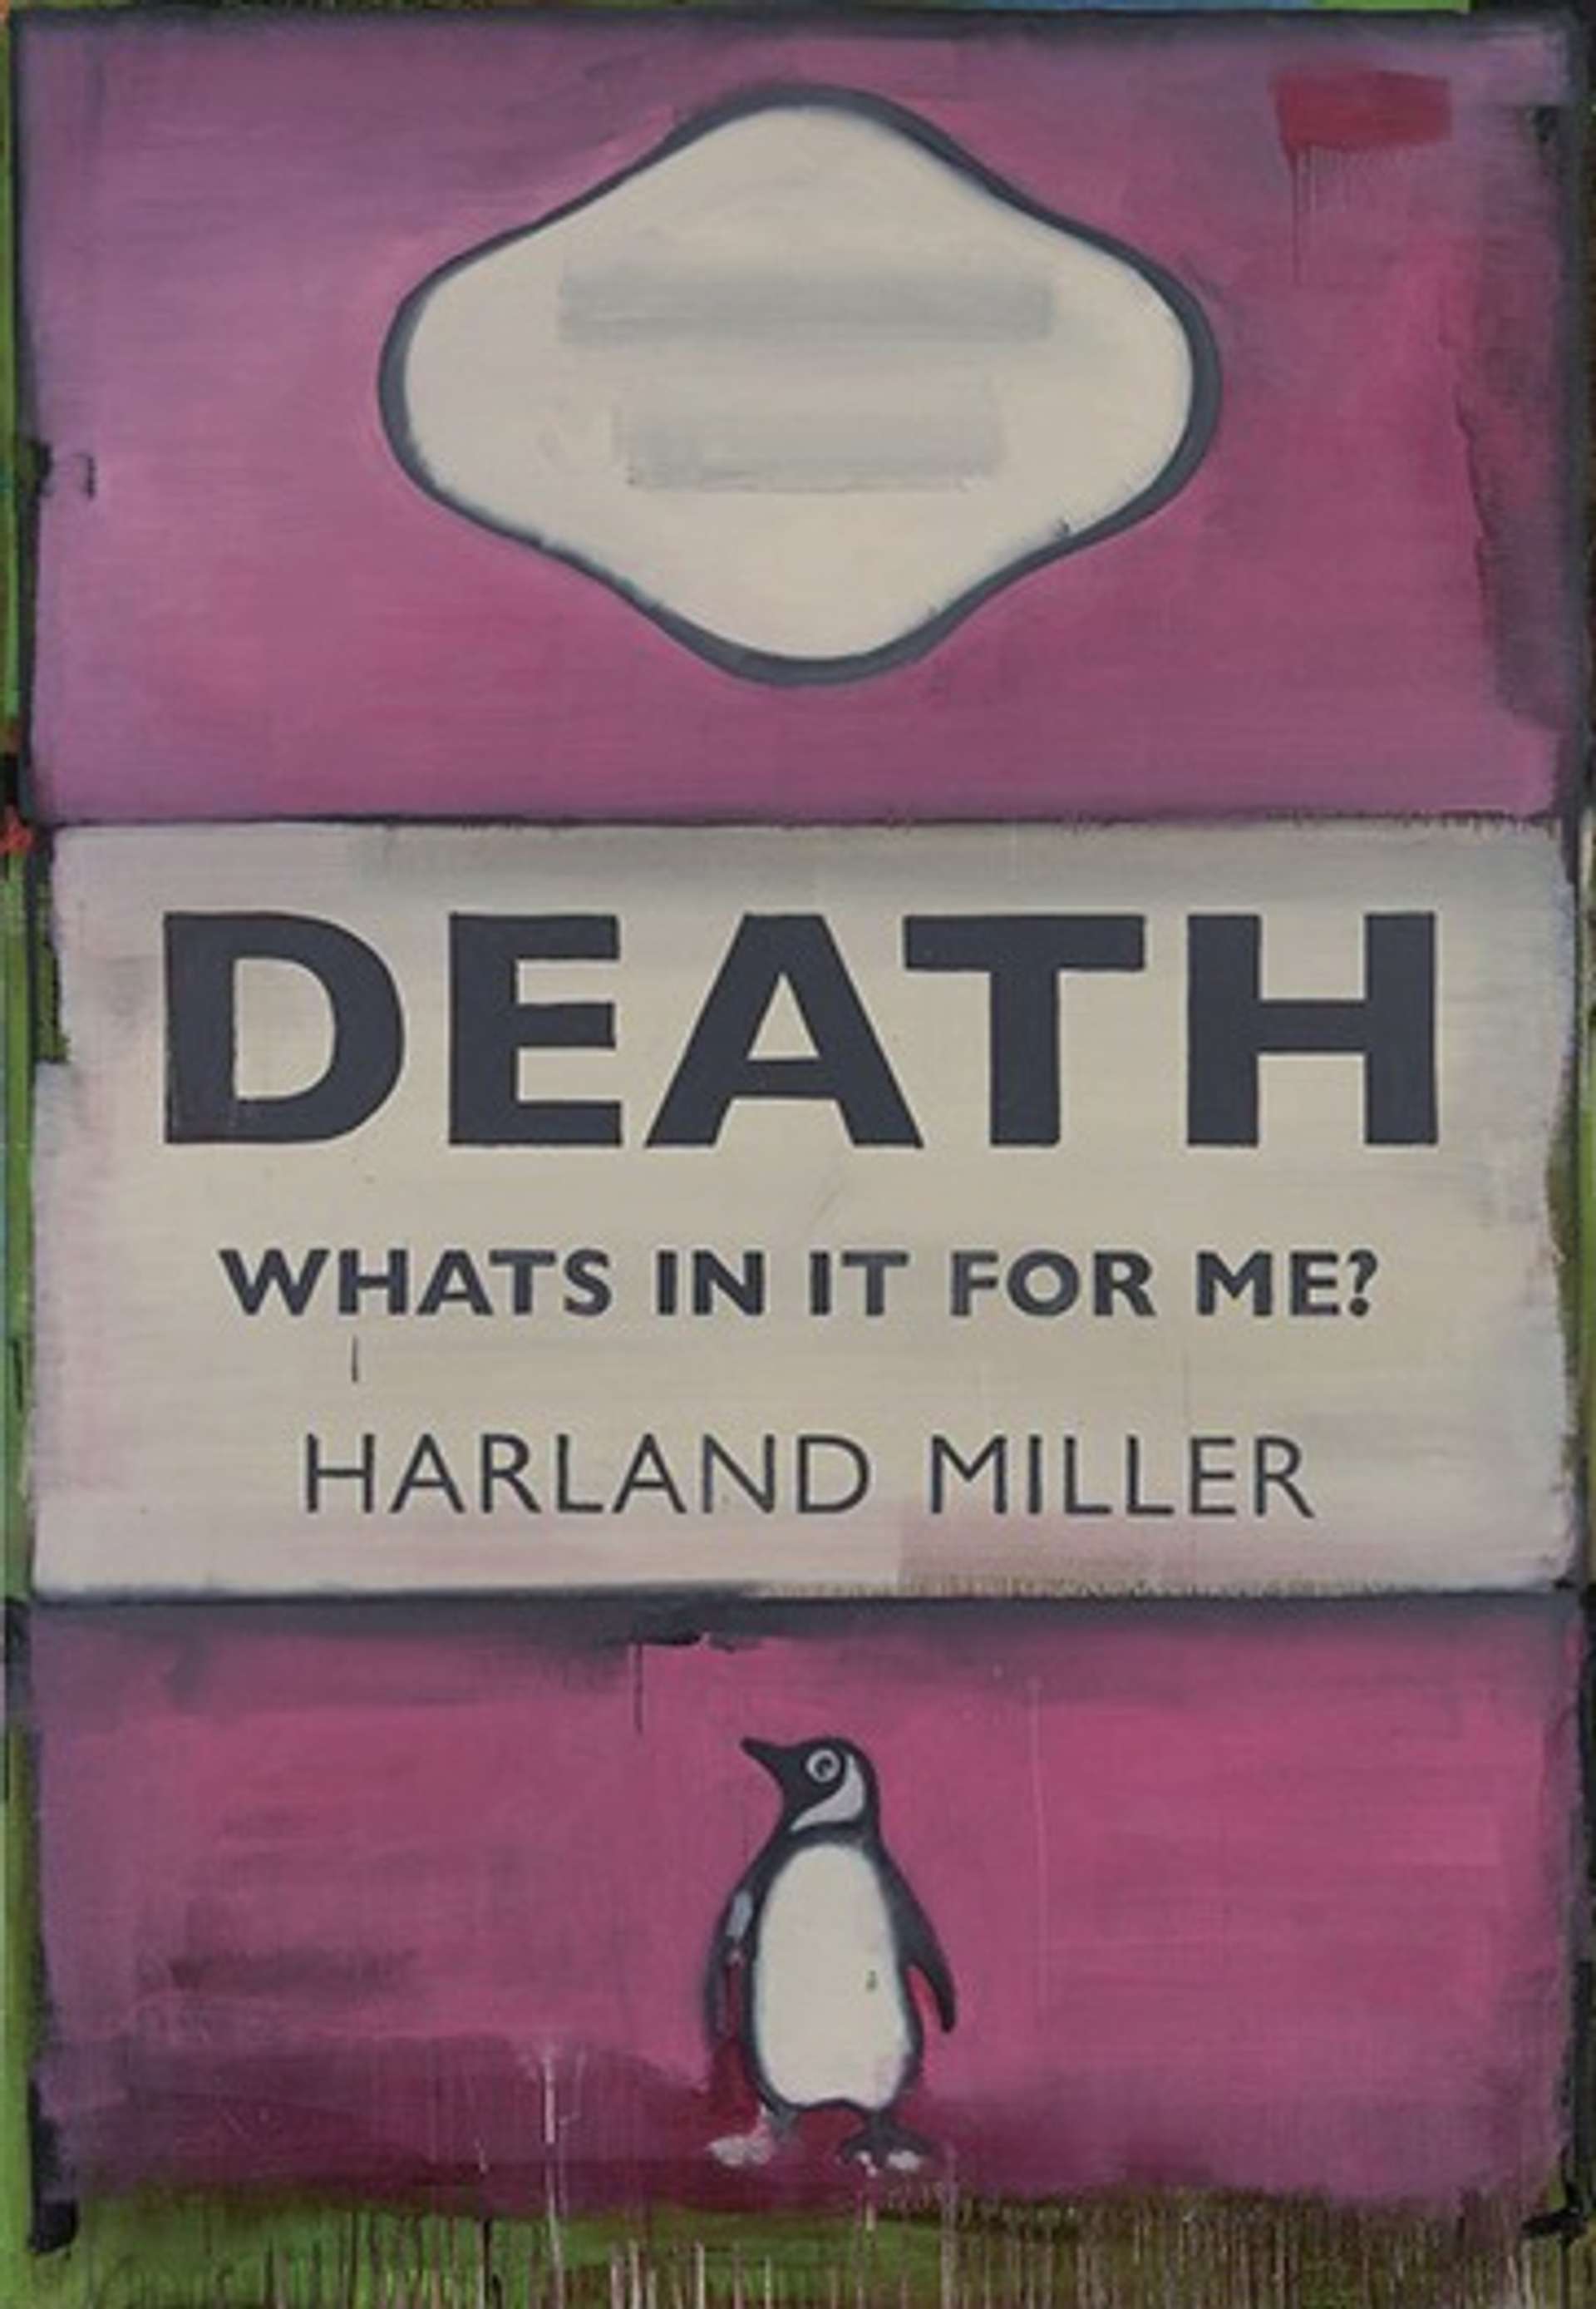 Death, What’s in it for Me? by Harland Miller